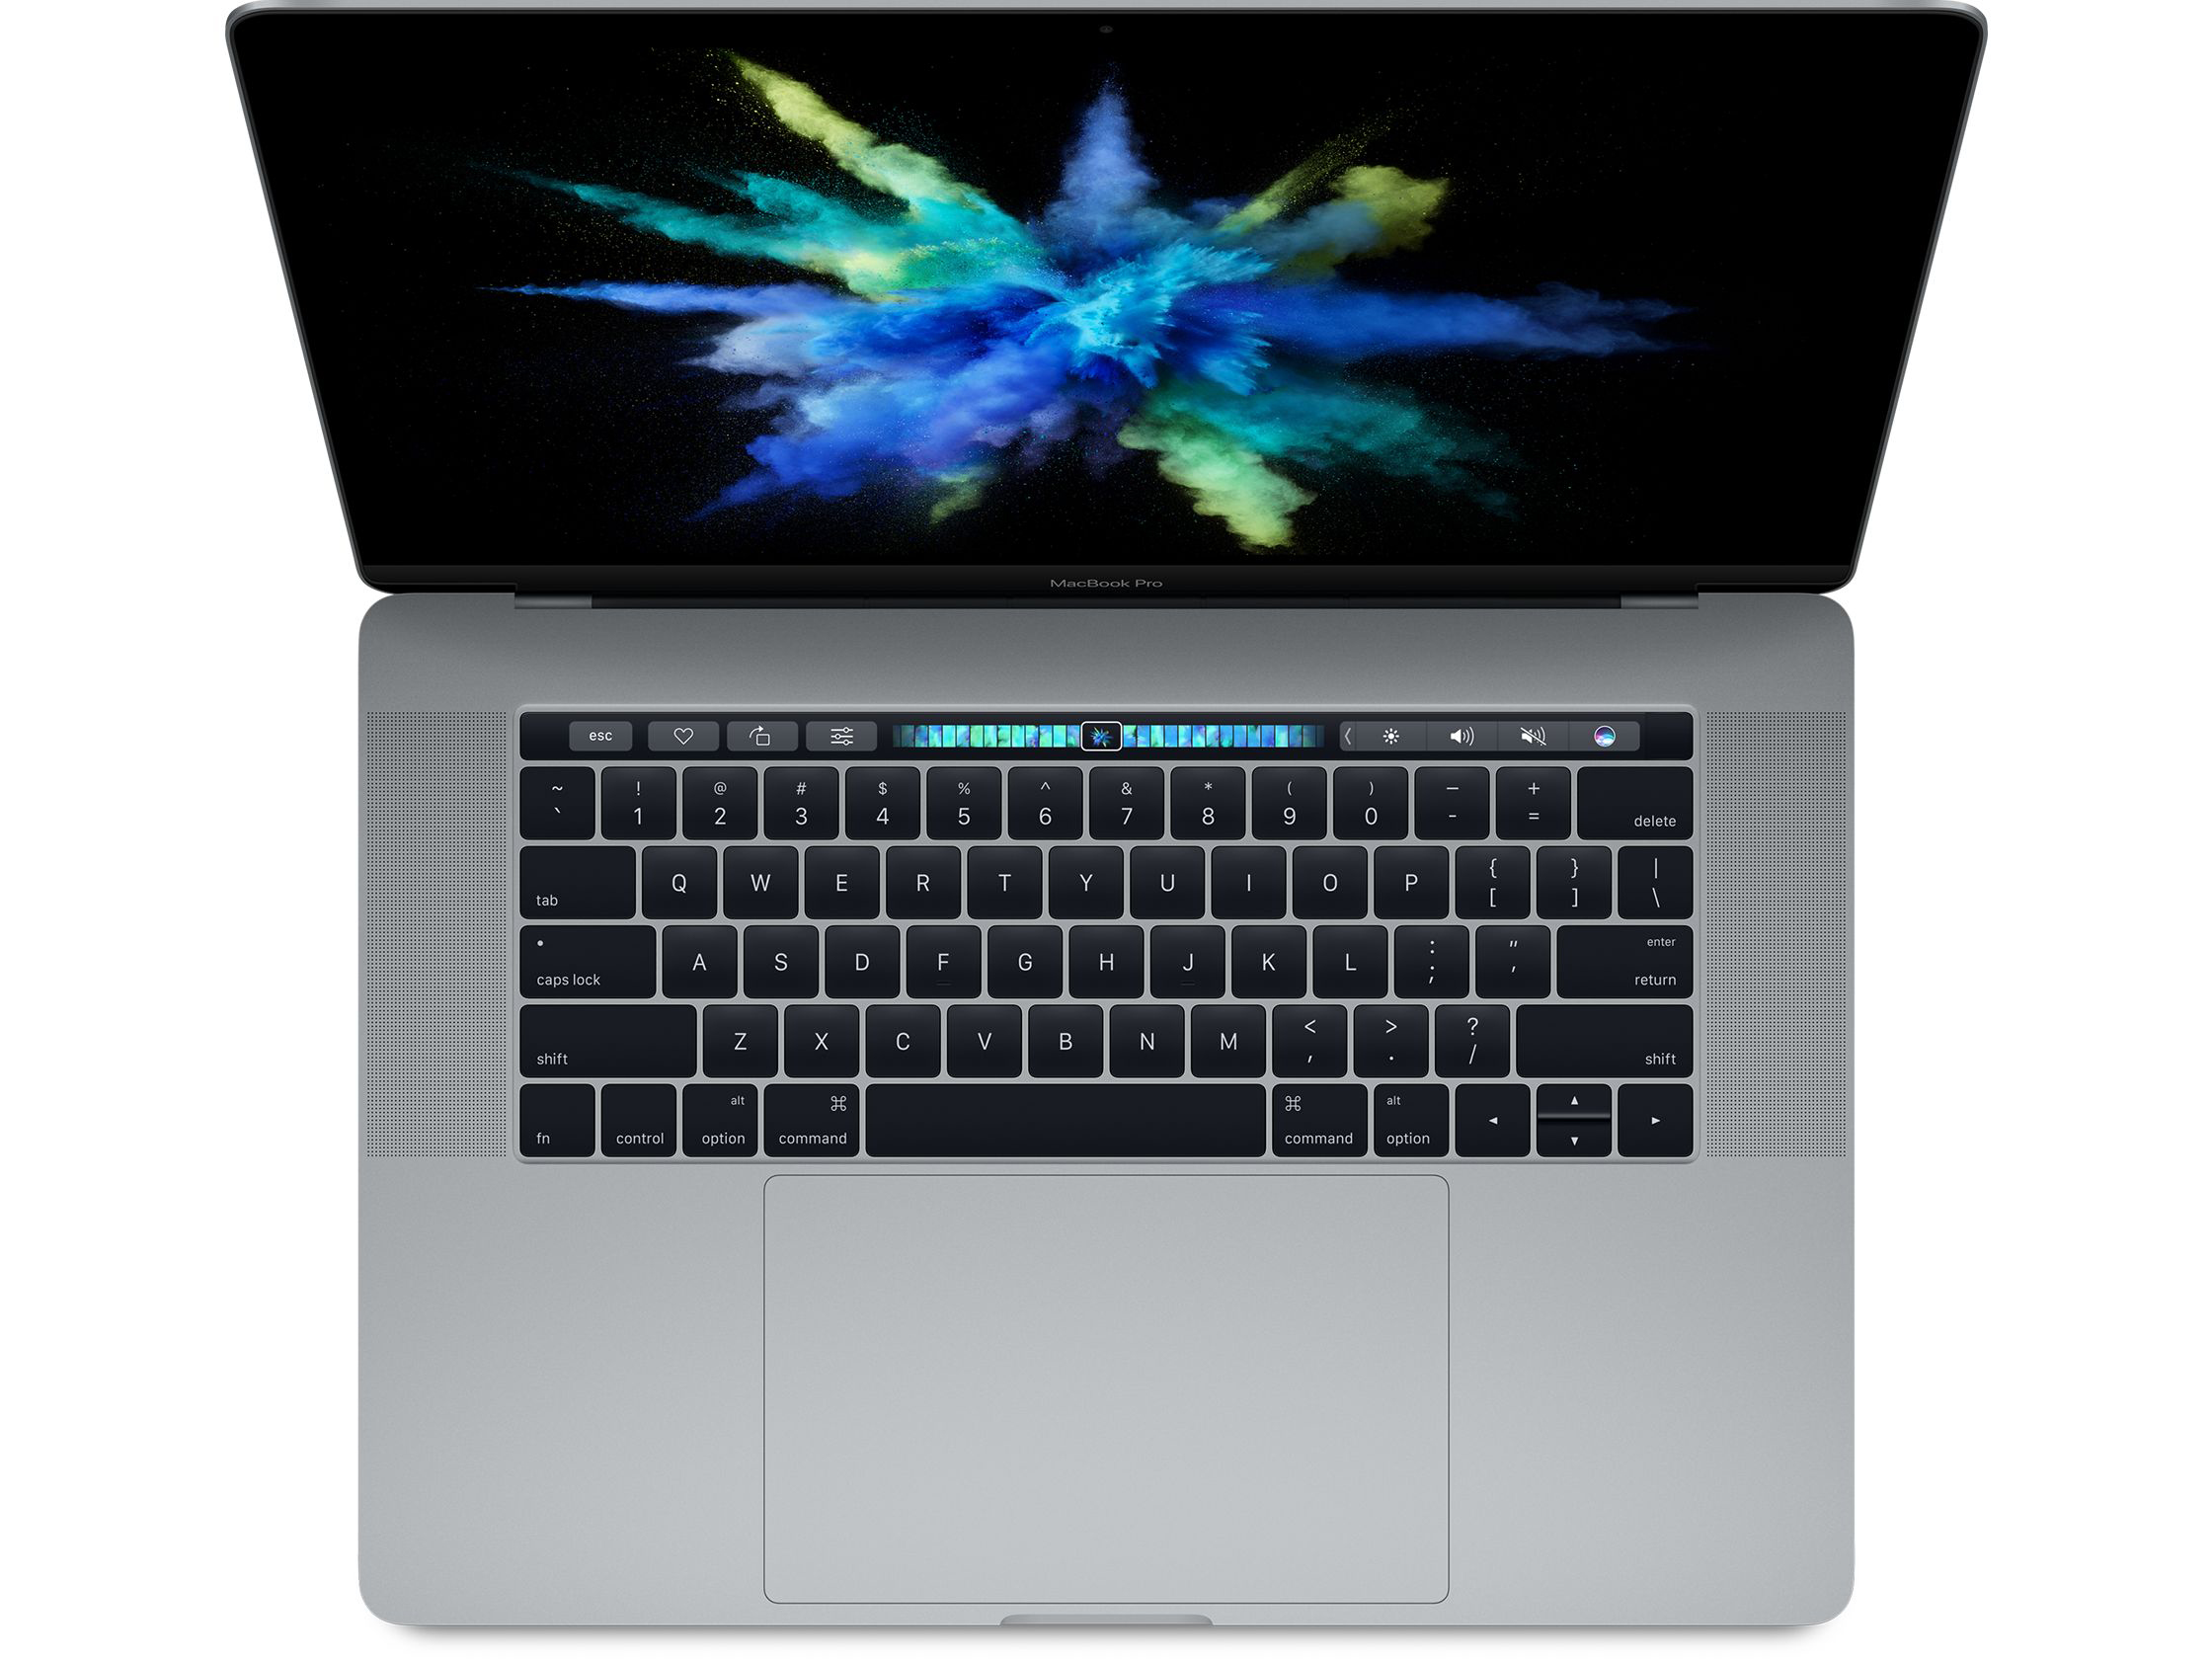 Apple MacBook Pro 15 (Late 2016, 2.7 GHz, 455) Notebook Review -  NotebookCheck.net Reviews